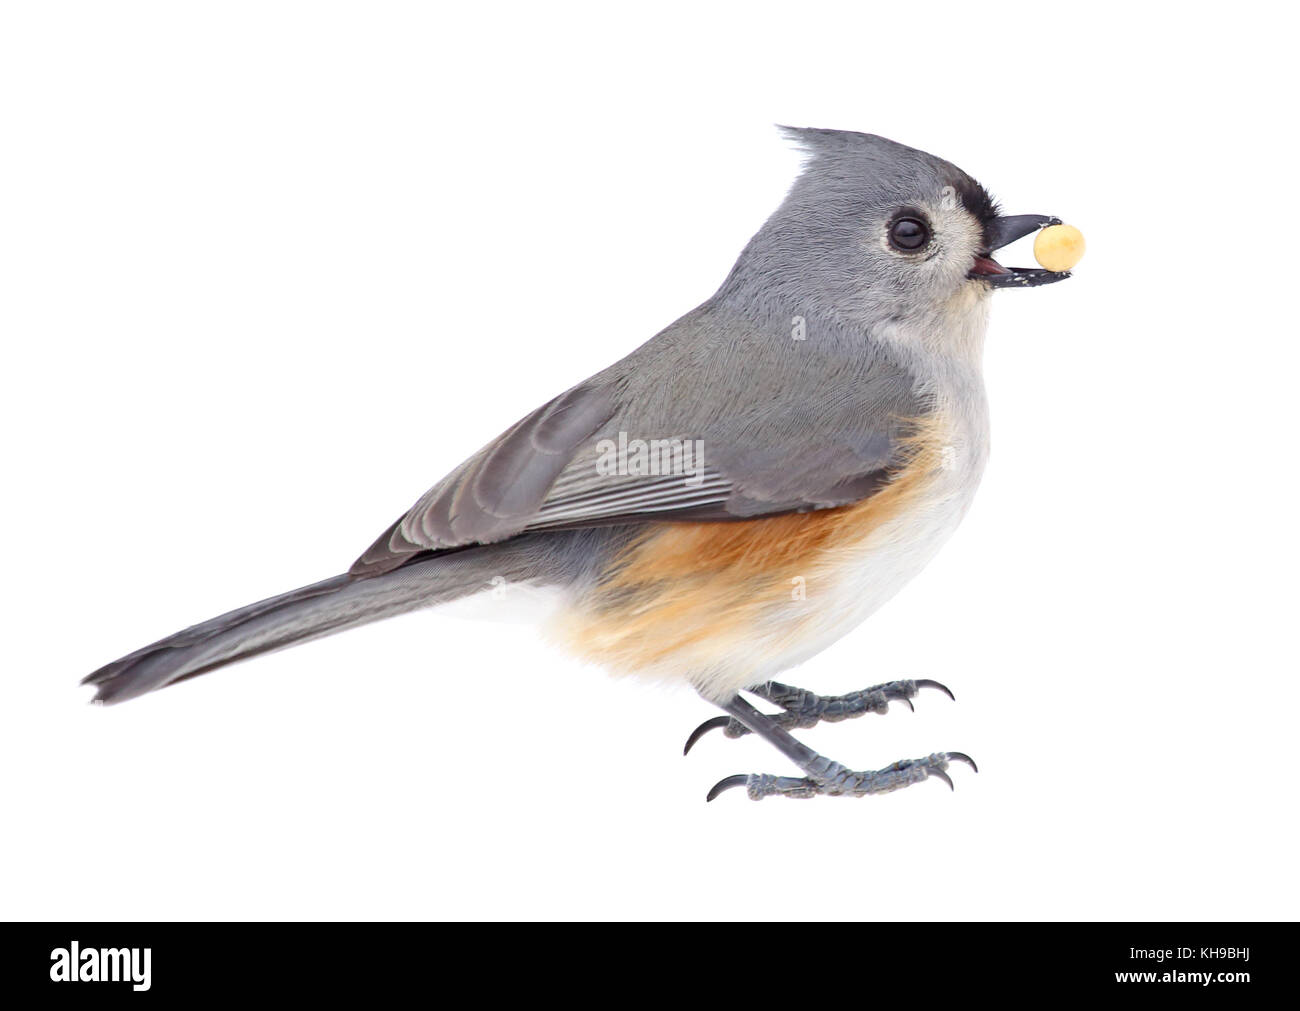 Tufted titmouse, Baeolophus bicolor, eating a seed isolated on white Stock Photo